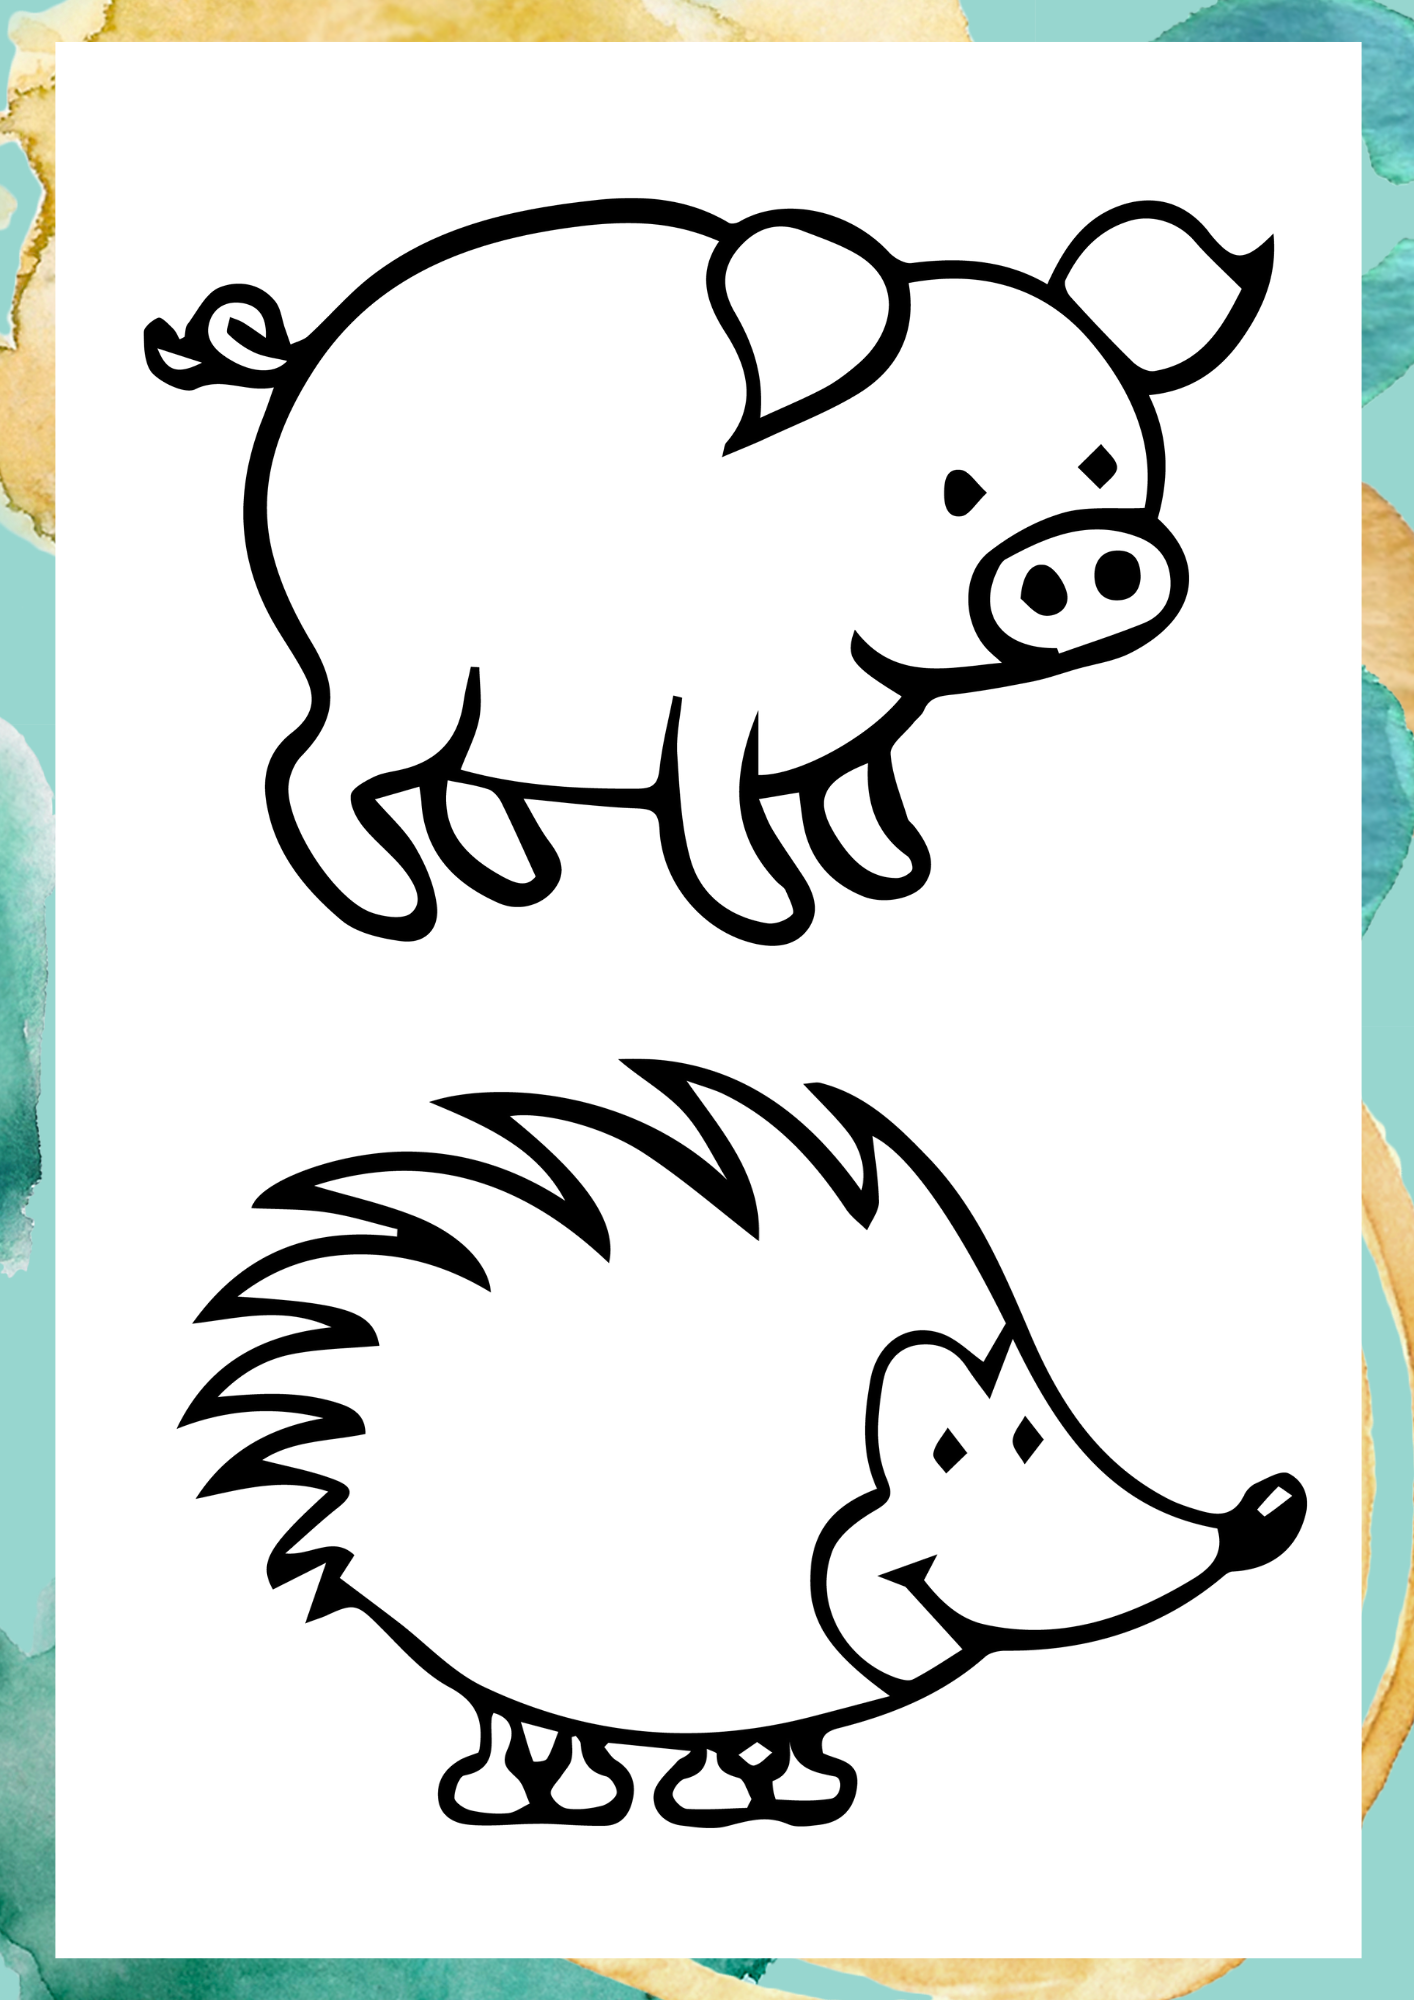 pig coloring page, hedgehog coloring page, animal coloring page, coloring page, coloring page for toddlers, coloring sheet, happy color, colouring, free coloring pages, coloring pages for kids, printable coloring pages, cute coloring pages, colouring pages, colouring to print, free printable coloring pages, free coloring pages for kids, easy coloring pages, coloring sheets